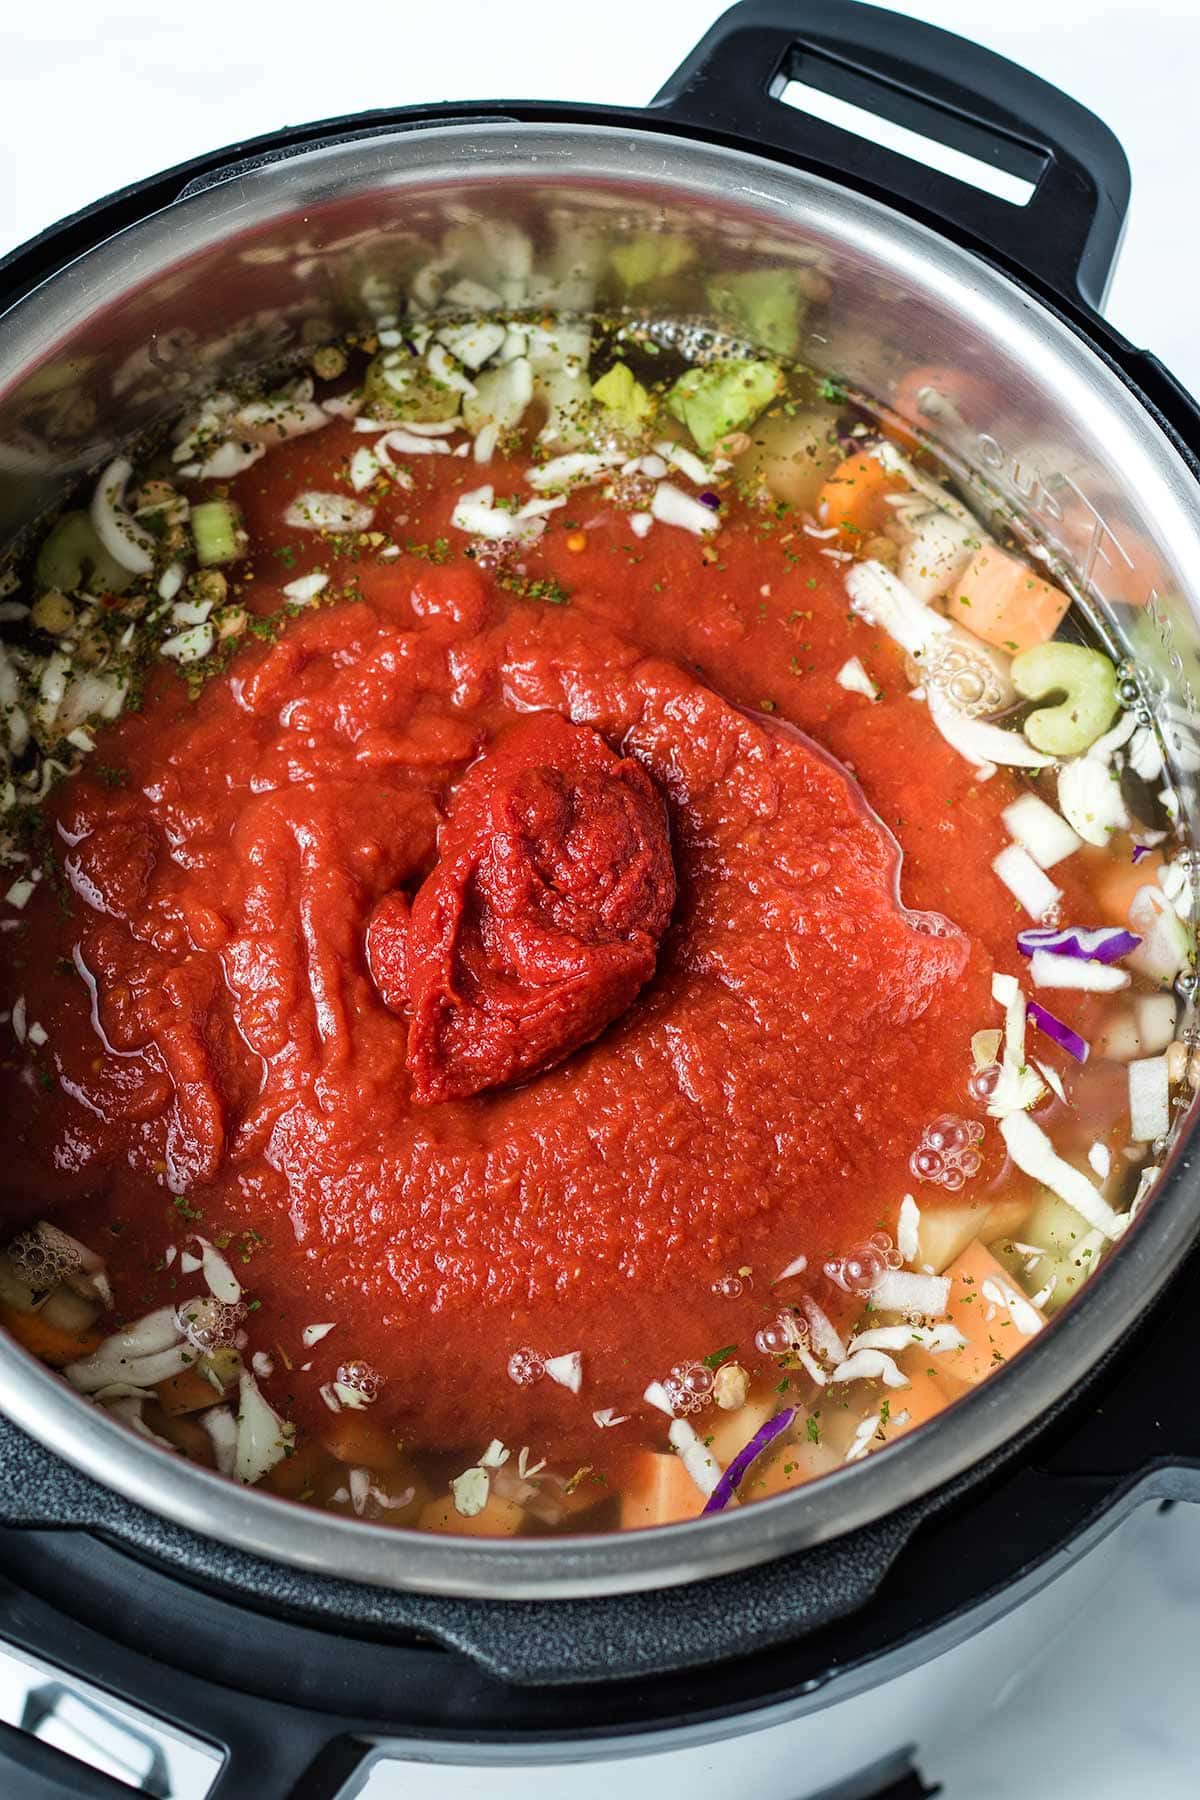 Crushed tomatoes and tomato paste layered on top of vegetables, lentils and broth in an Instant Pot.